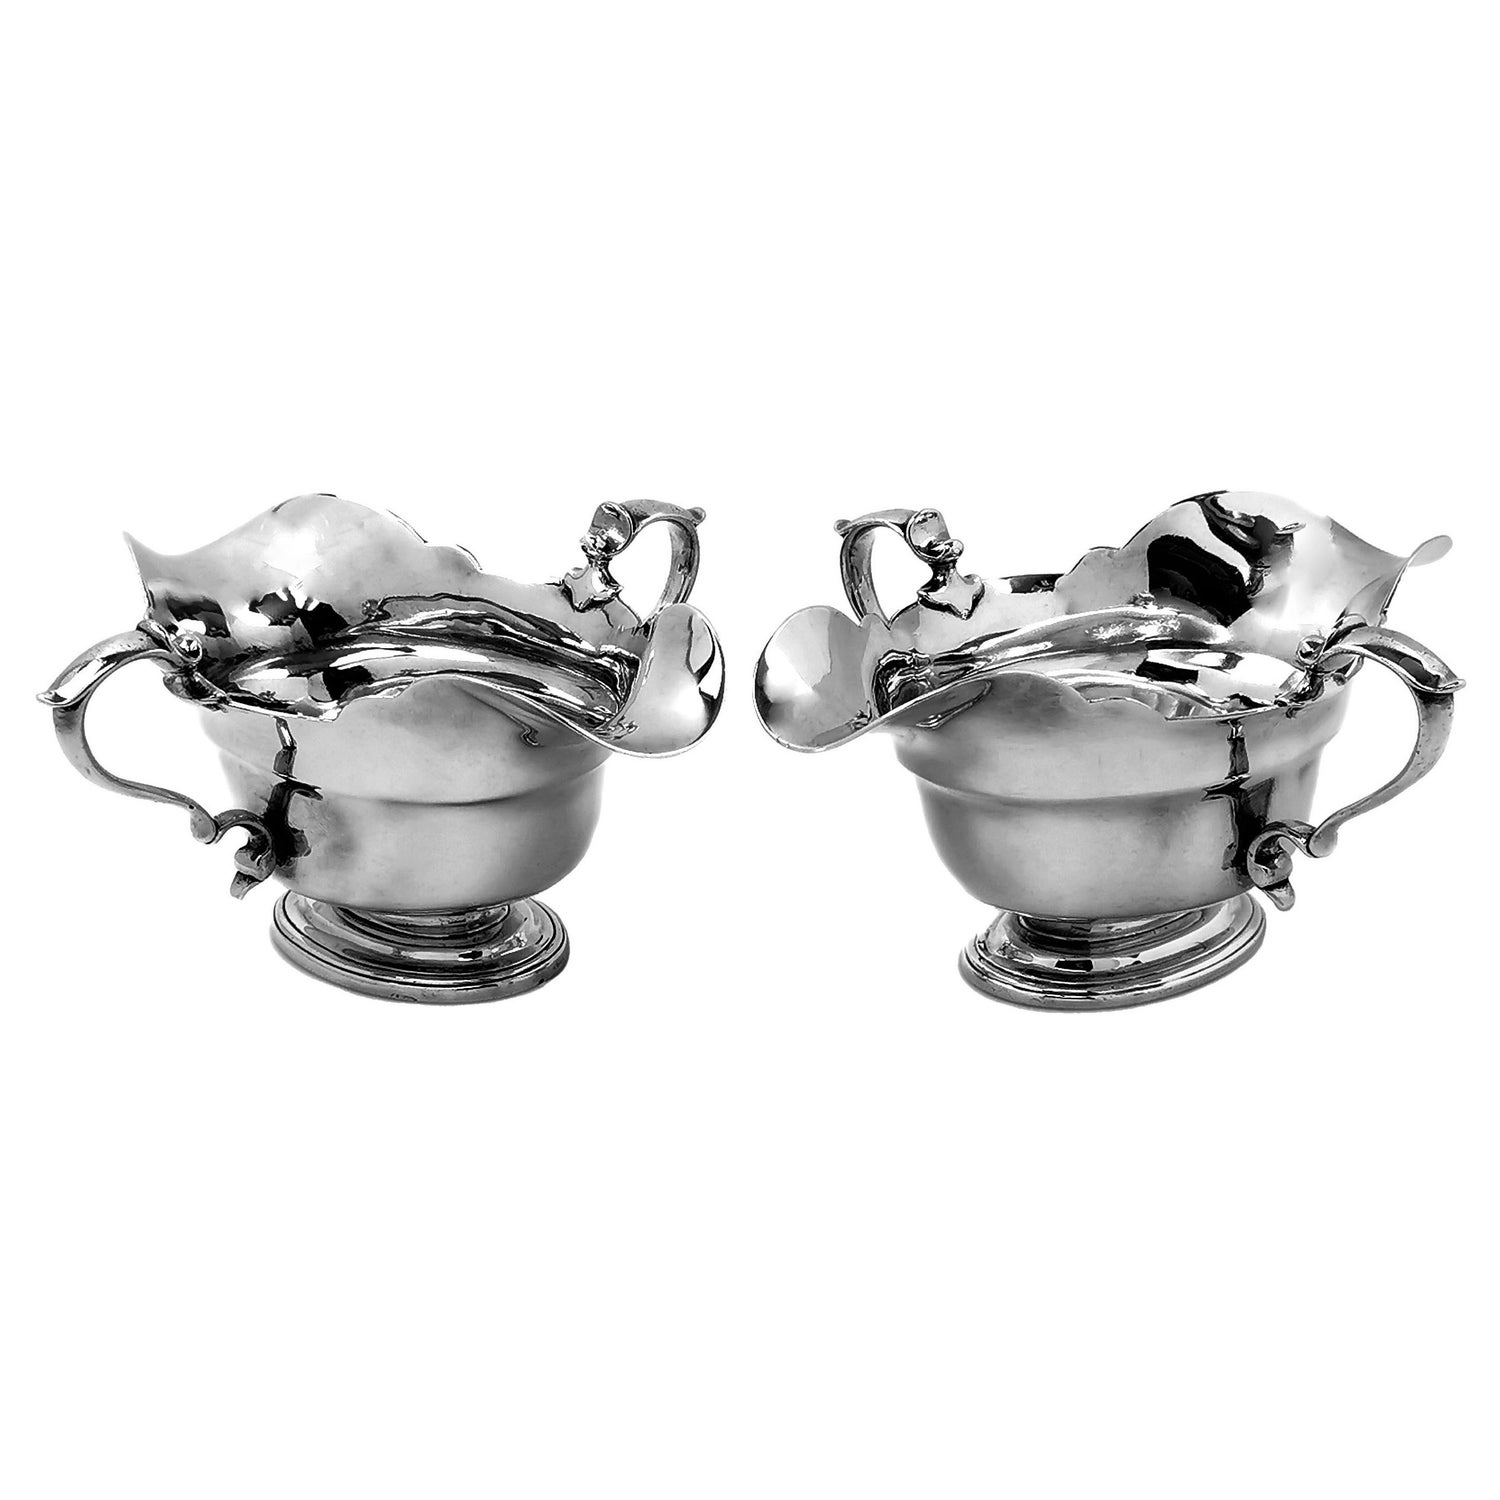 Pair Antique Sterling Silver Double Lipped Sauce Boats / Gravy Jugs 1908 / 9